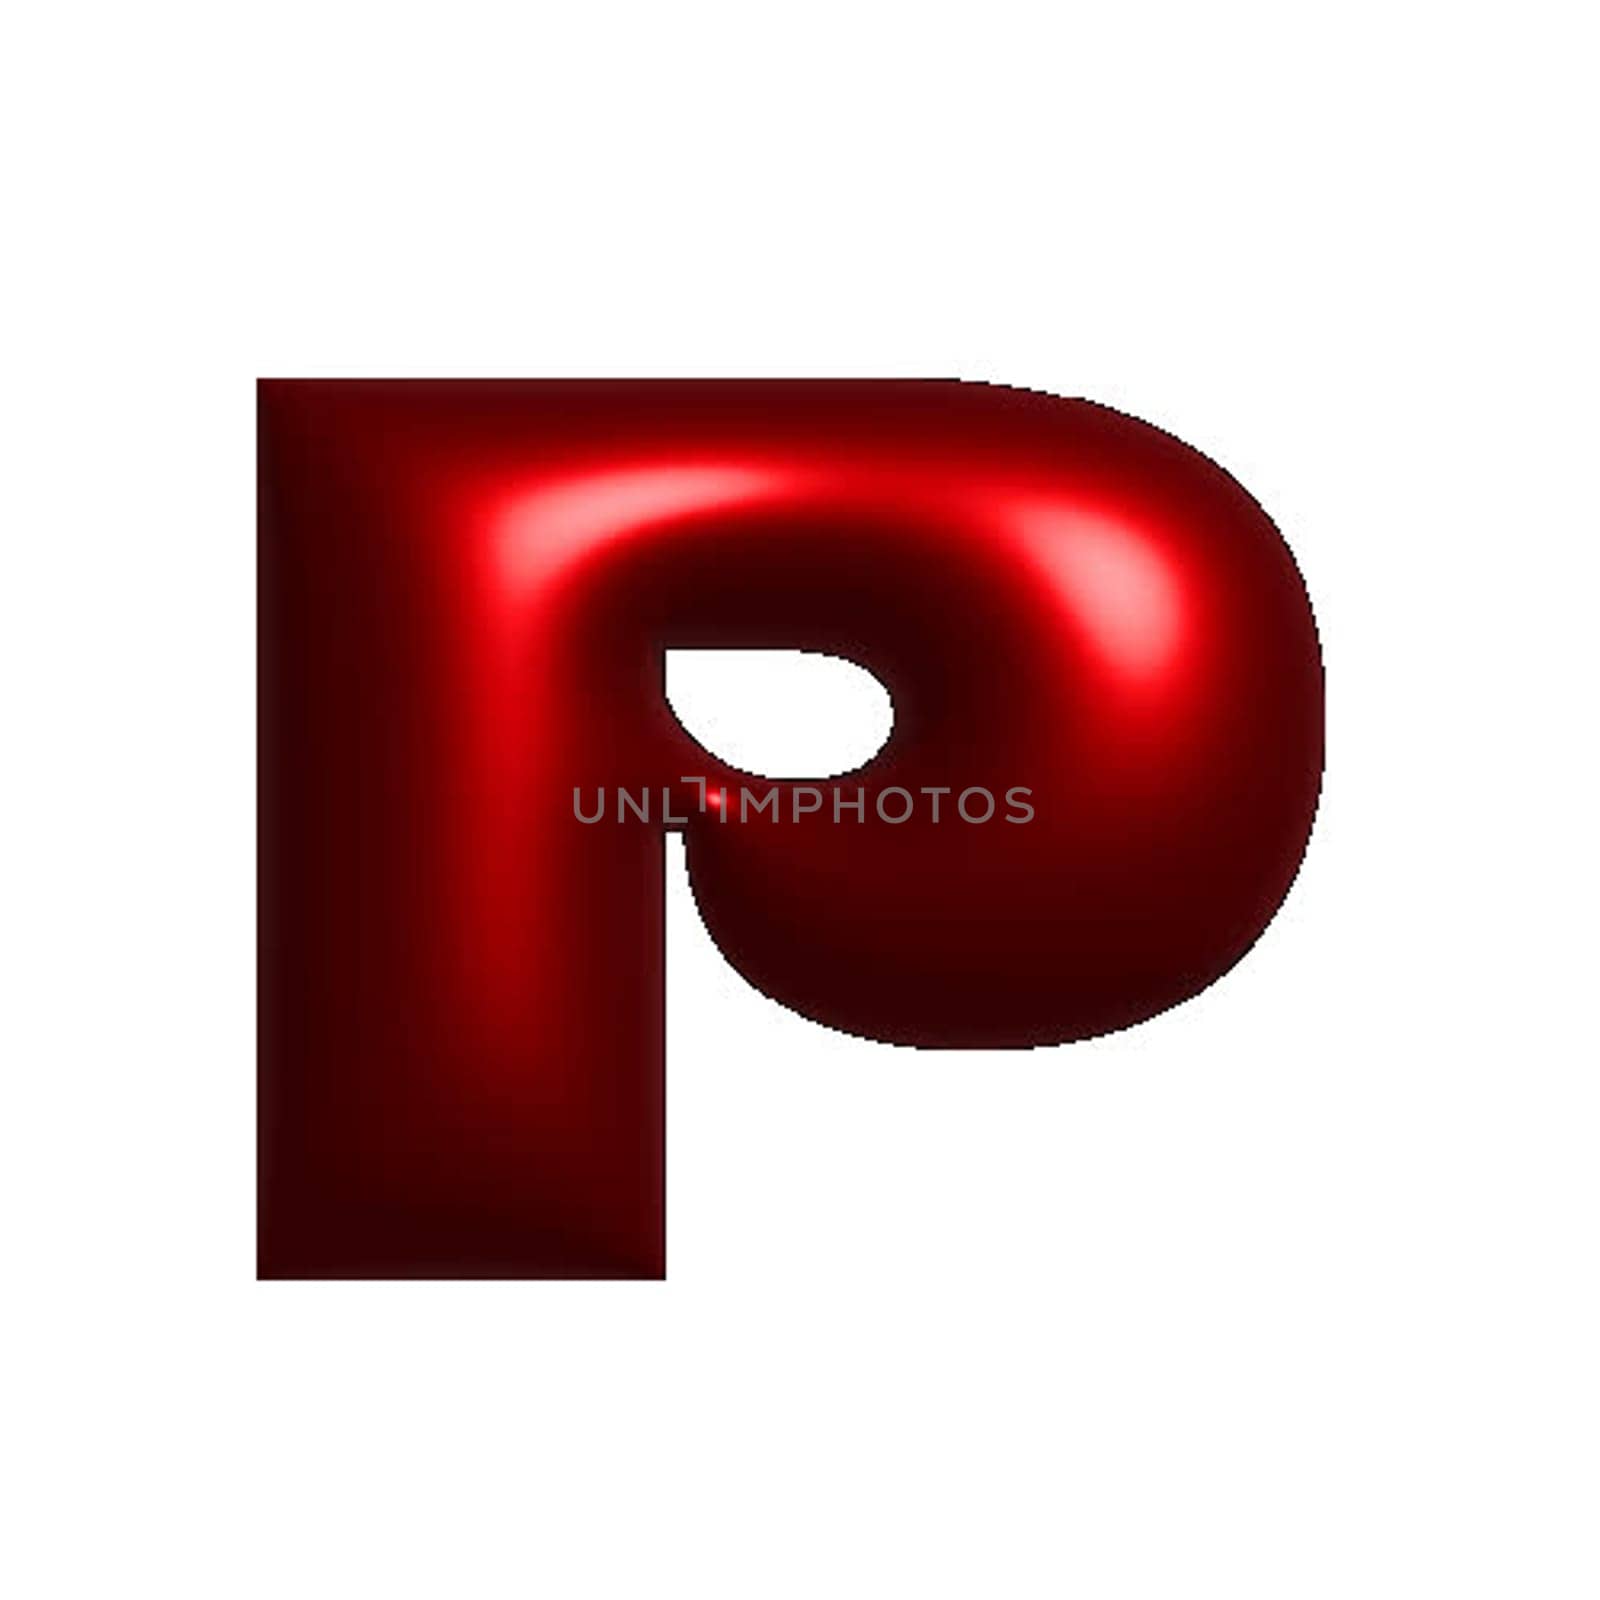 Red metal shiny reflective letter P 3D illustration by Dustick